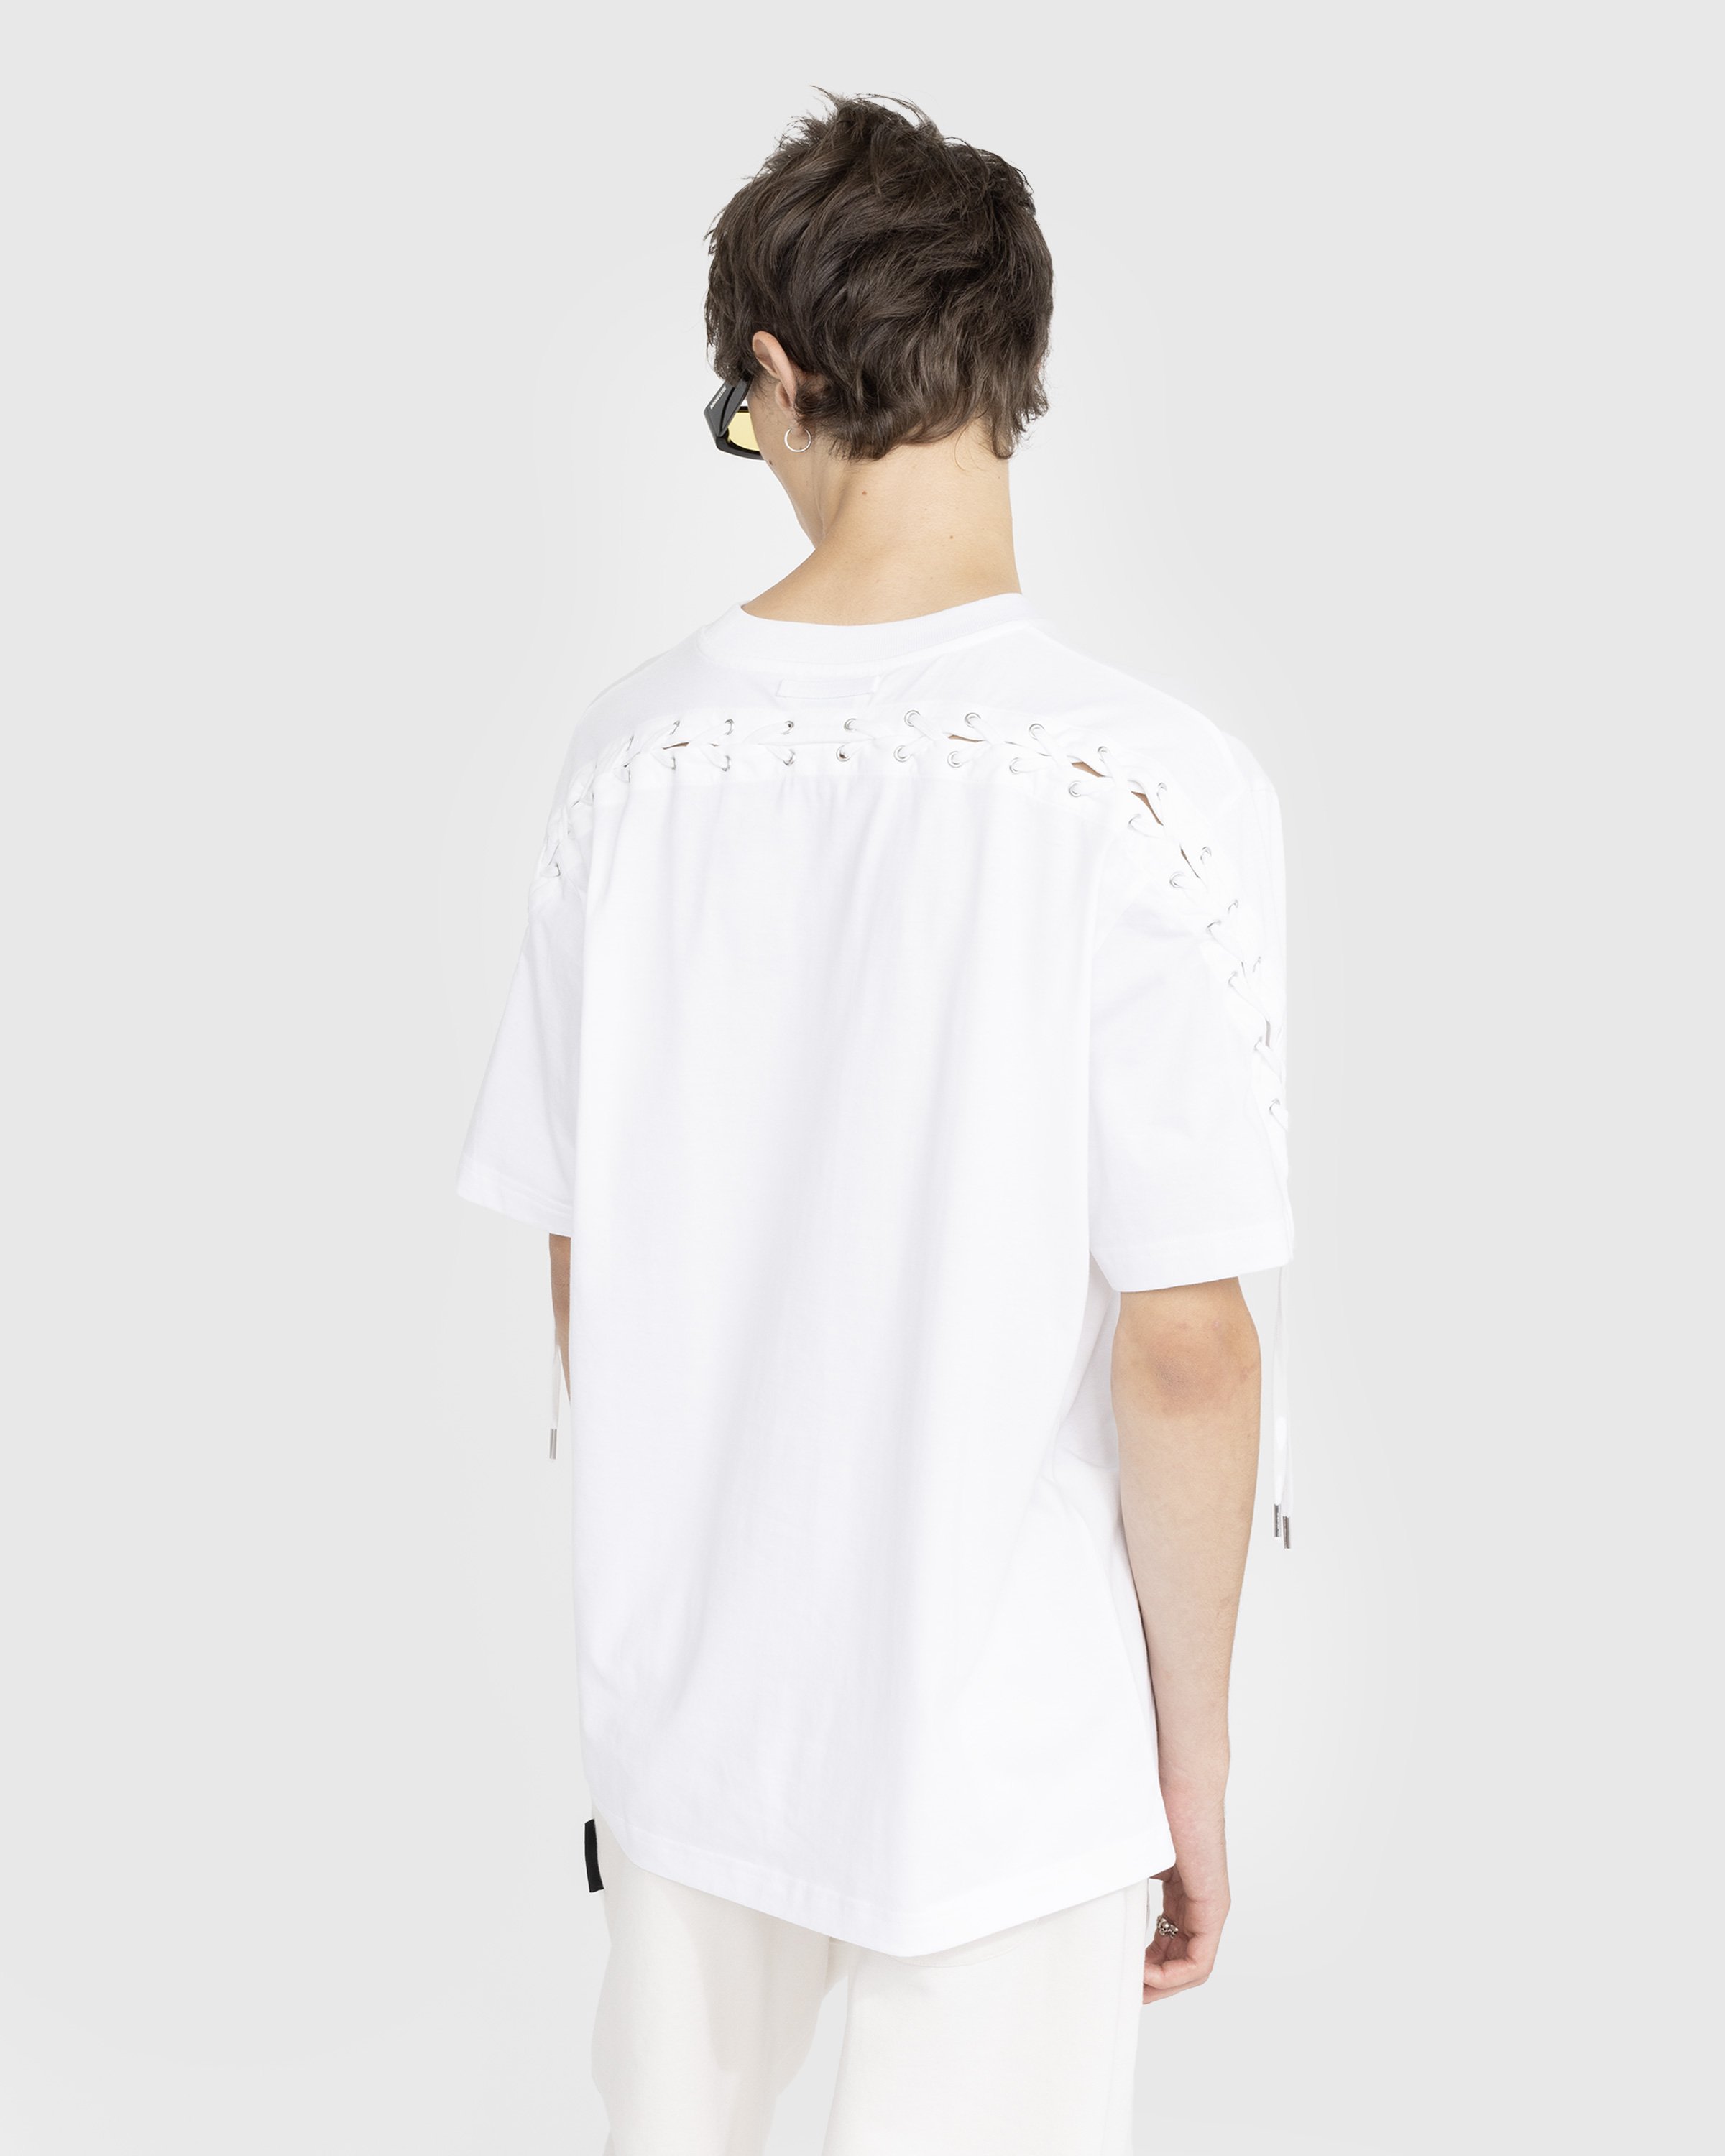 Jean Paul Gaultier - Oversize Laced T-Shirt White - Clothing - White - Image 3